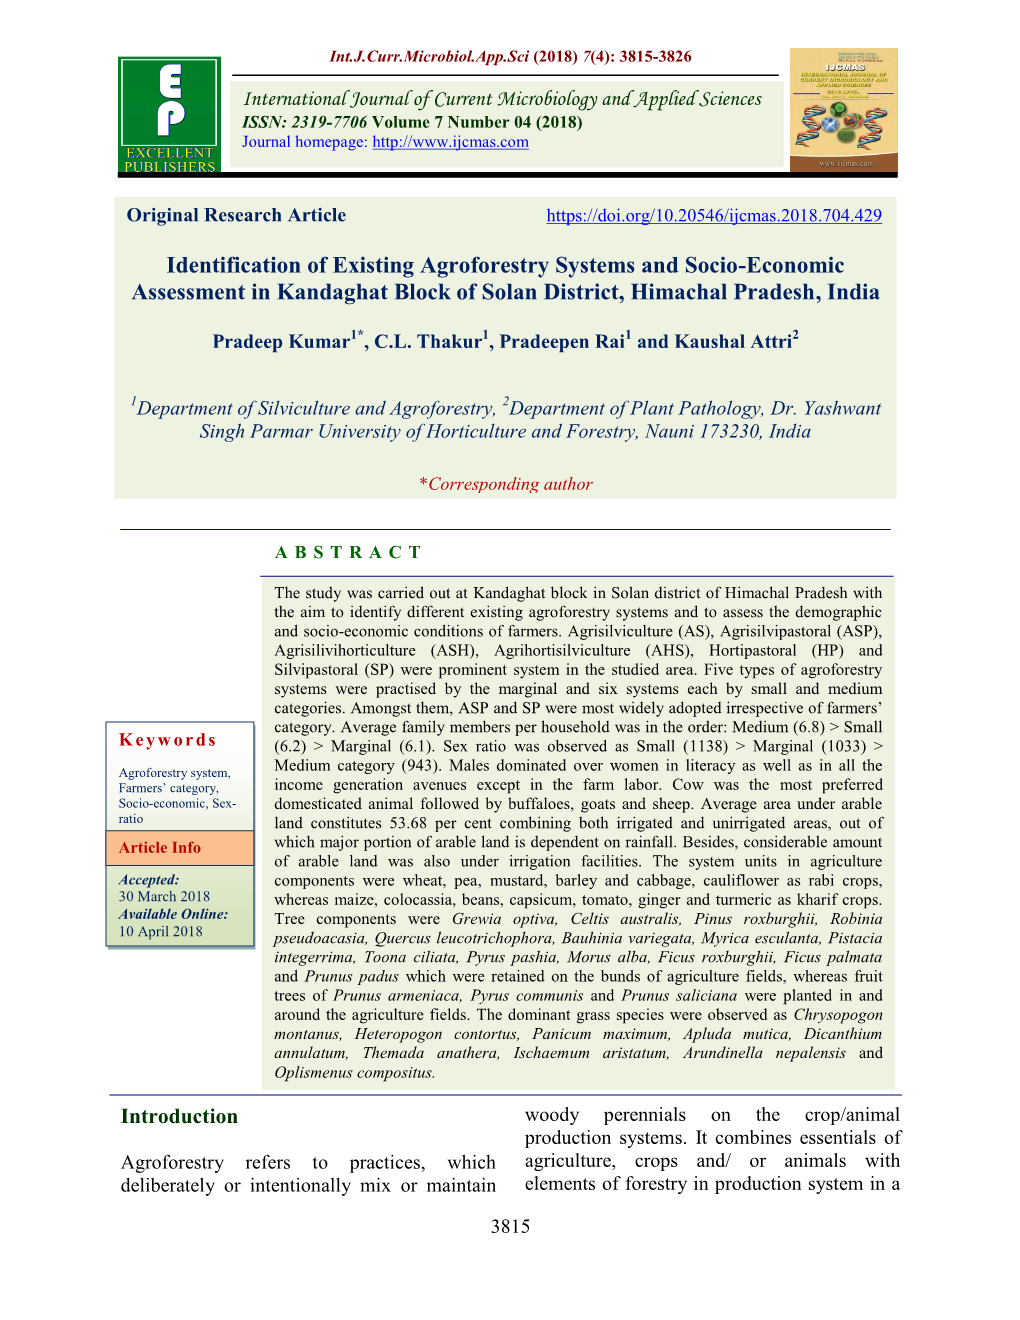 Identification of Existing Agroforestry Systems and Socio-Economic Assessment in Kandaghat Block of Solan District, Himachal Pradesh, India